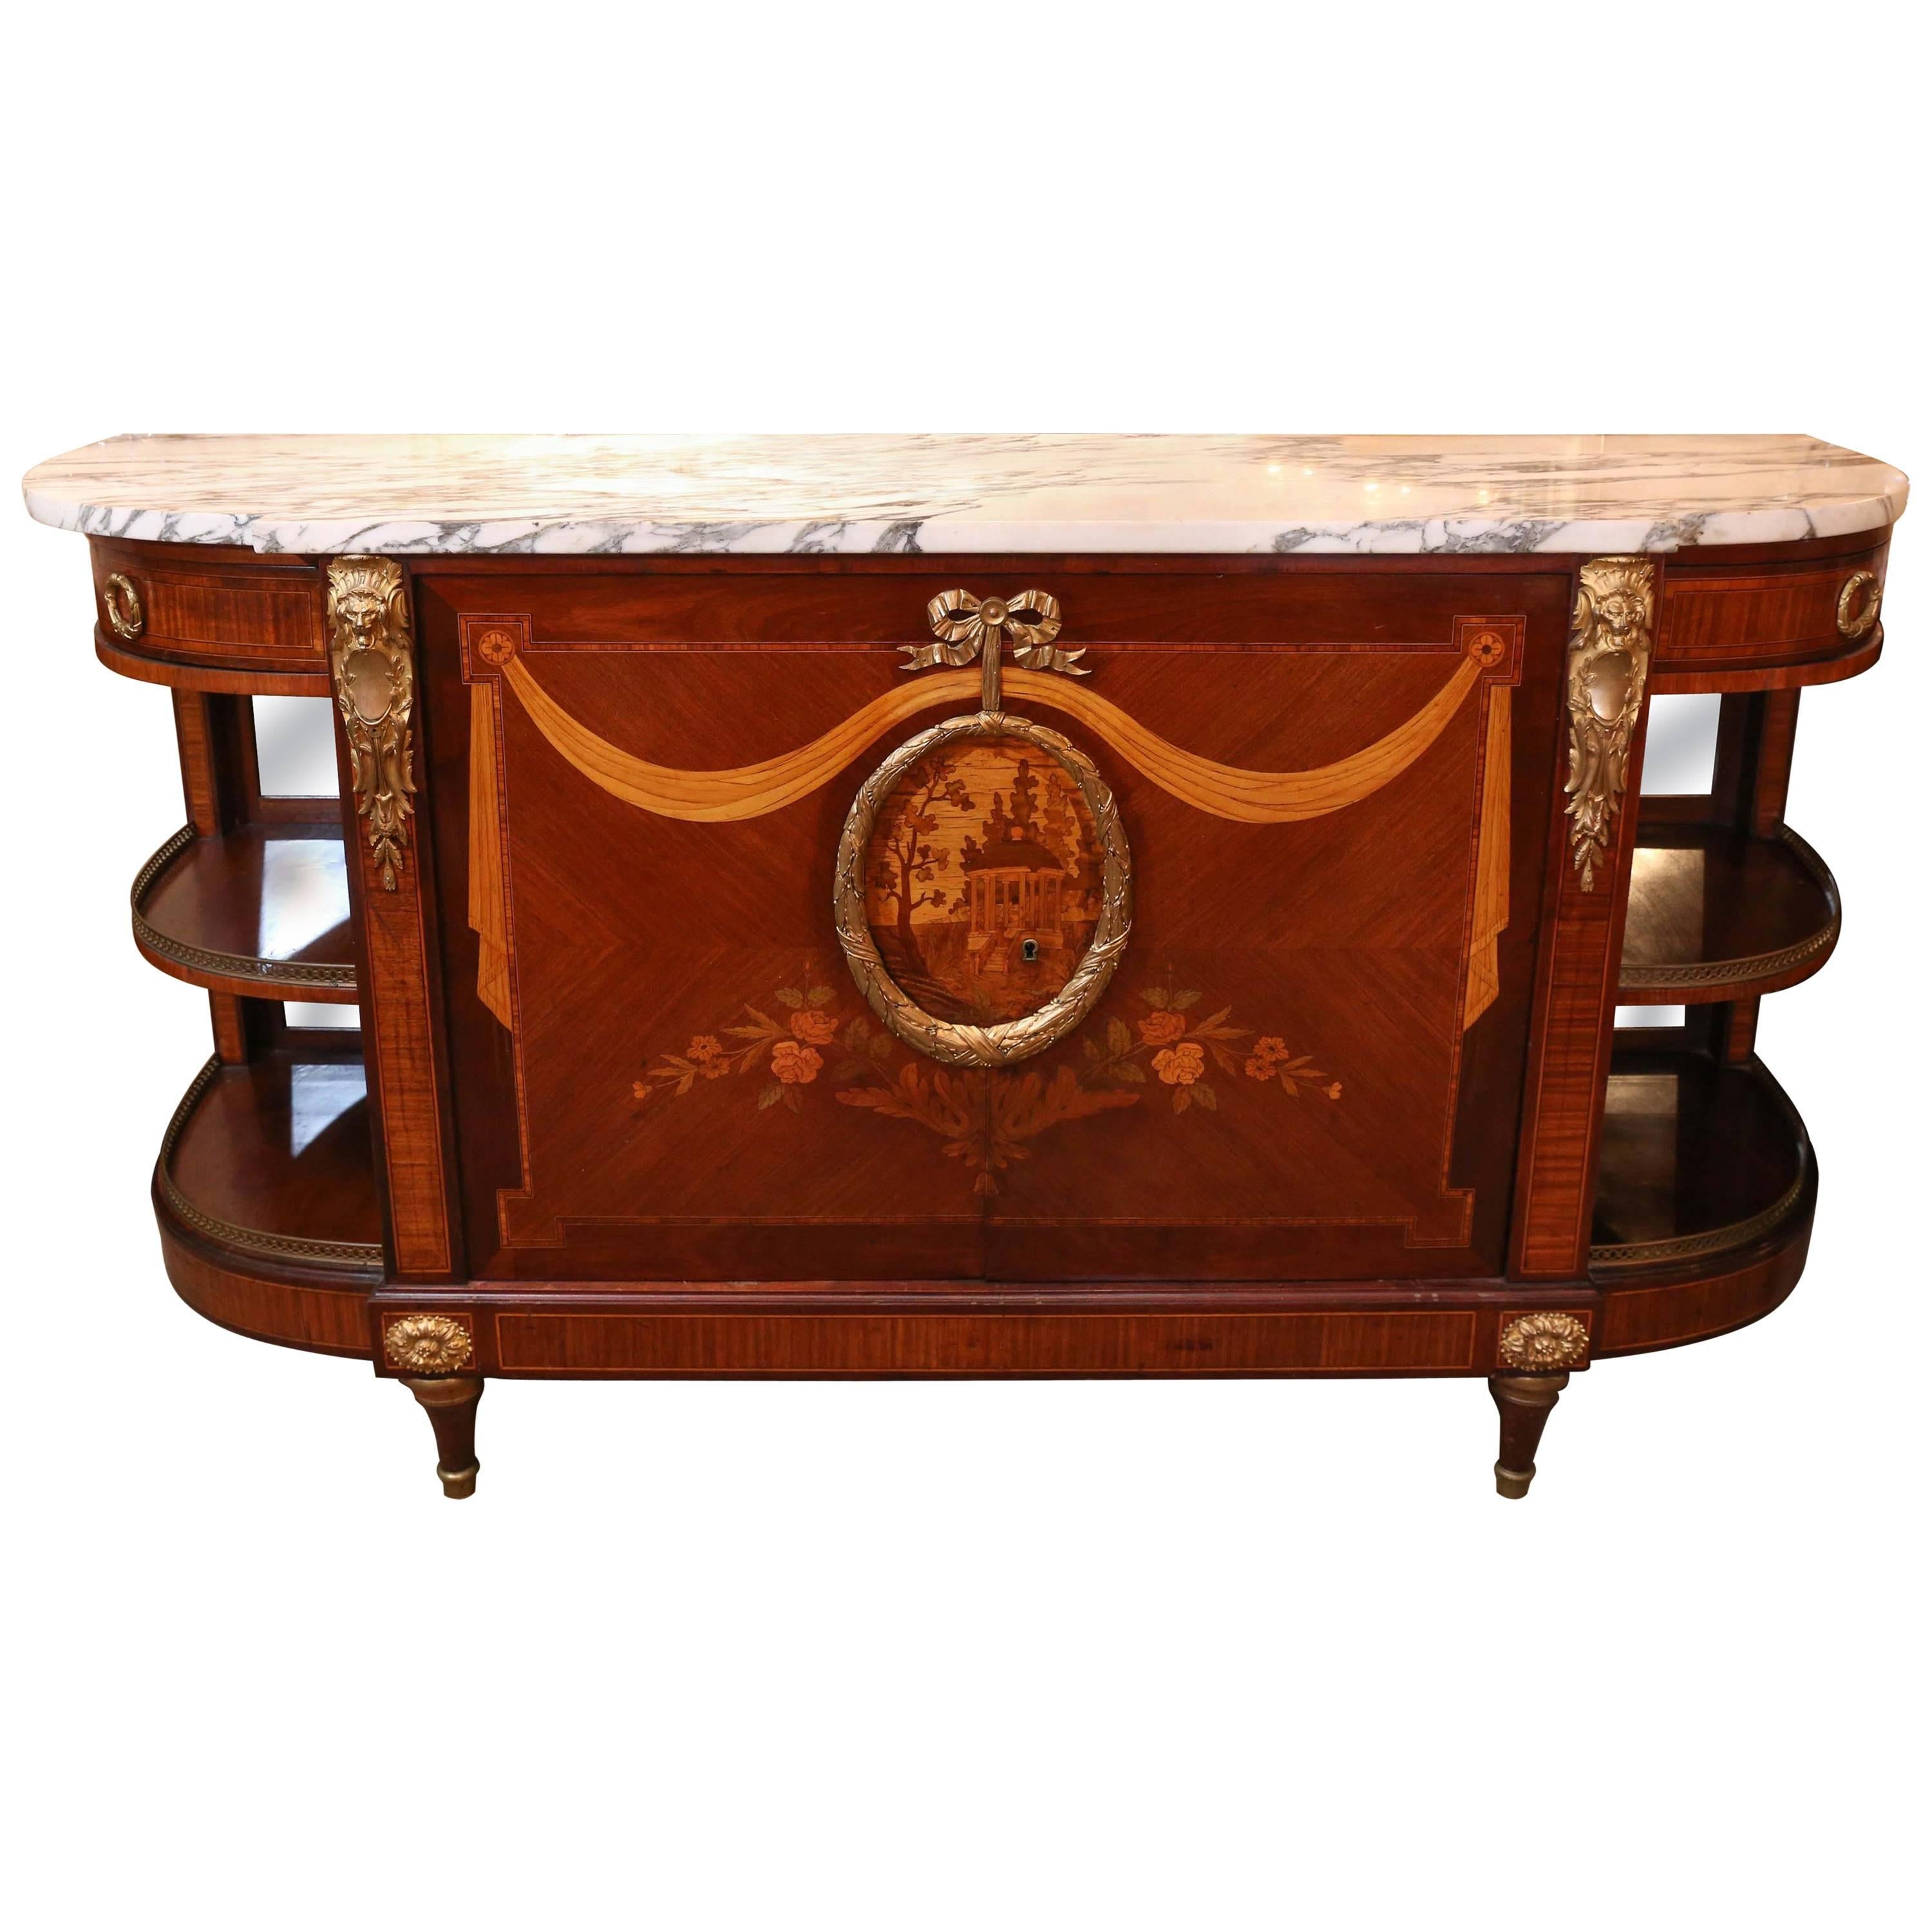 Louis XVI Style Gilt Bronze Mounted Mahogany and Marquetry Inlaid buffet